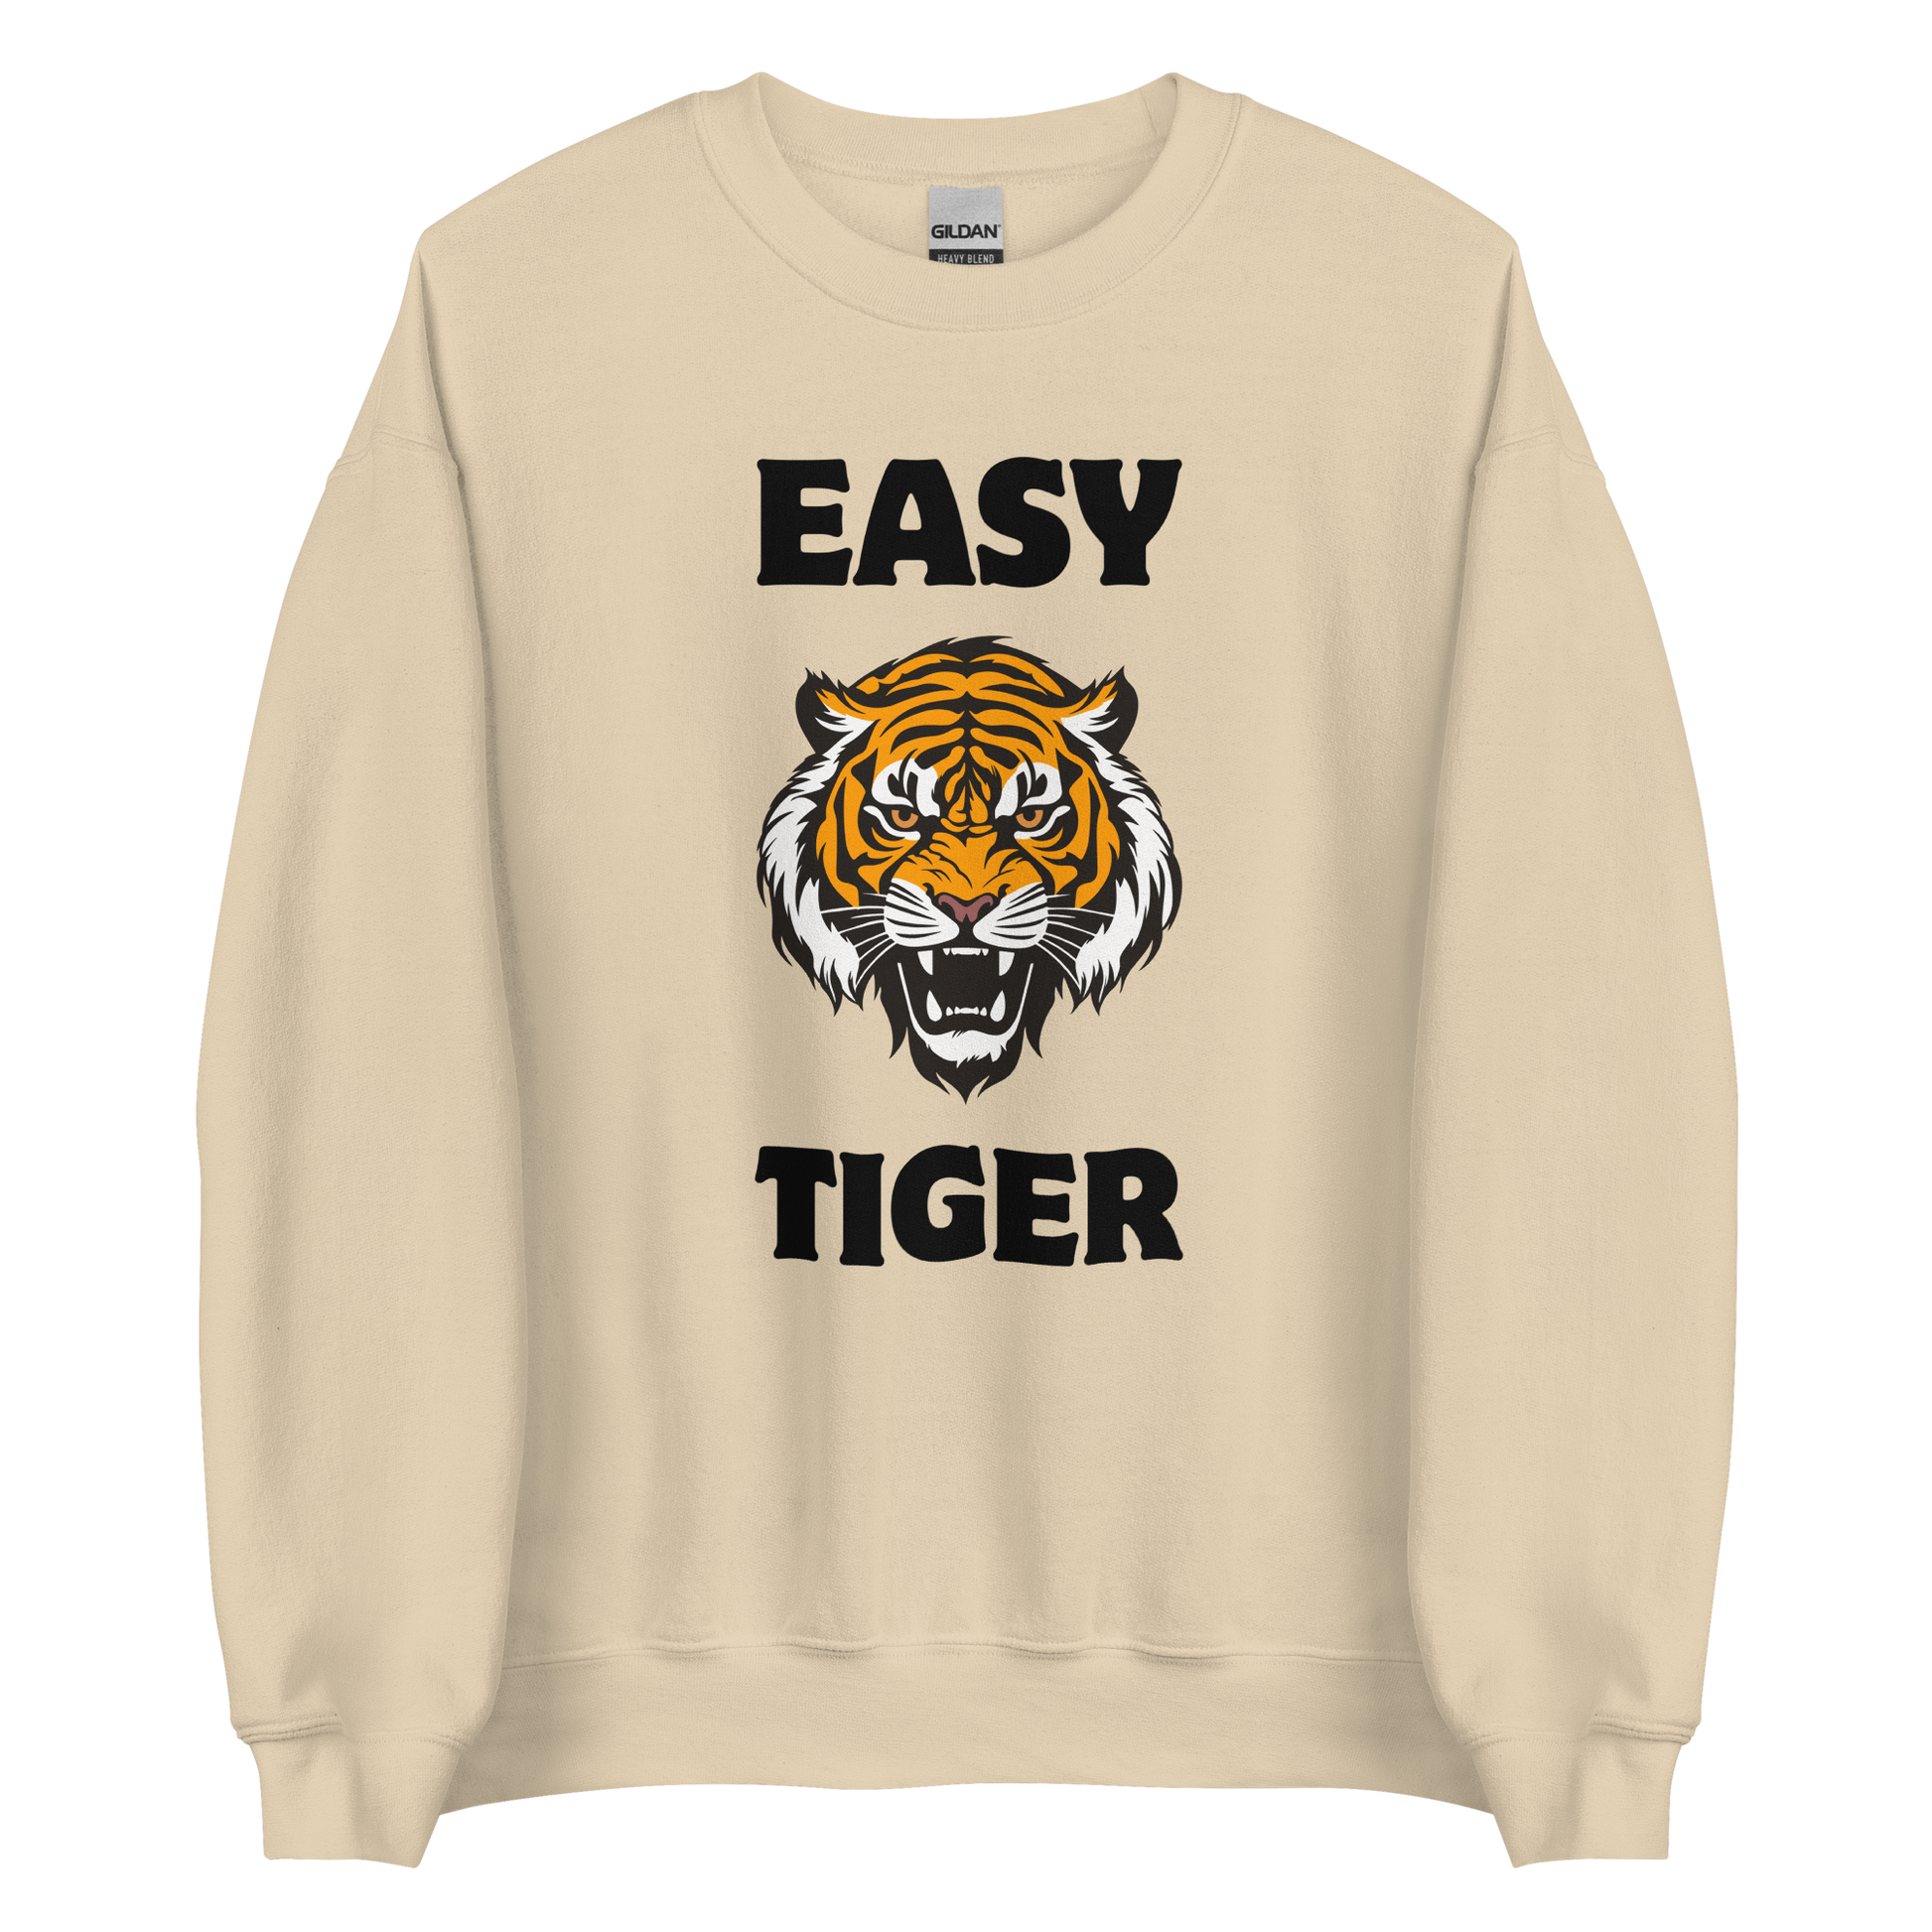 Sand Colored Tiger Sweatshirt featuring a Easy Tiger graphic on the chest - Funny Graphic Tiger Sweatshirts - Boozy Fox